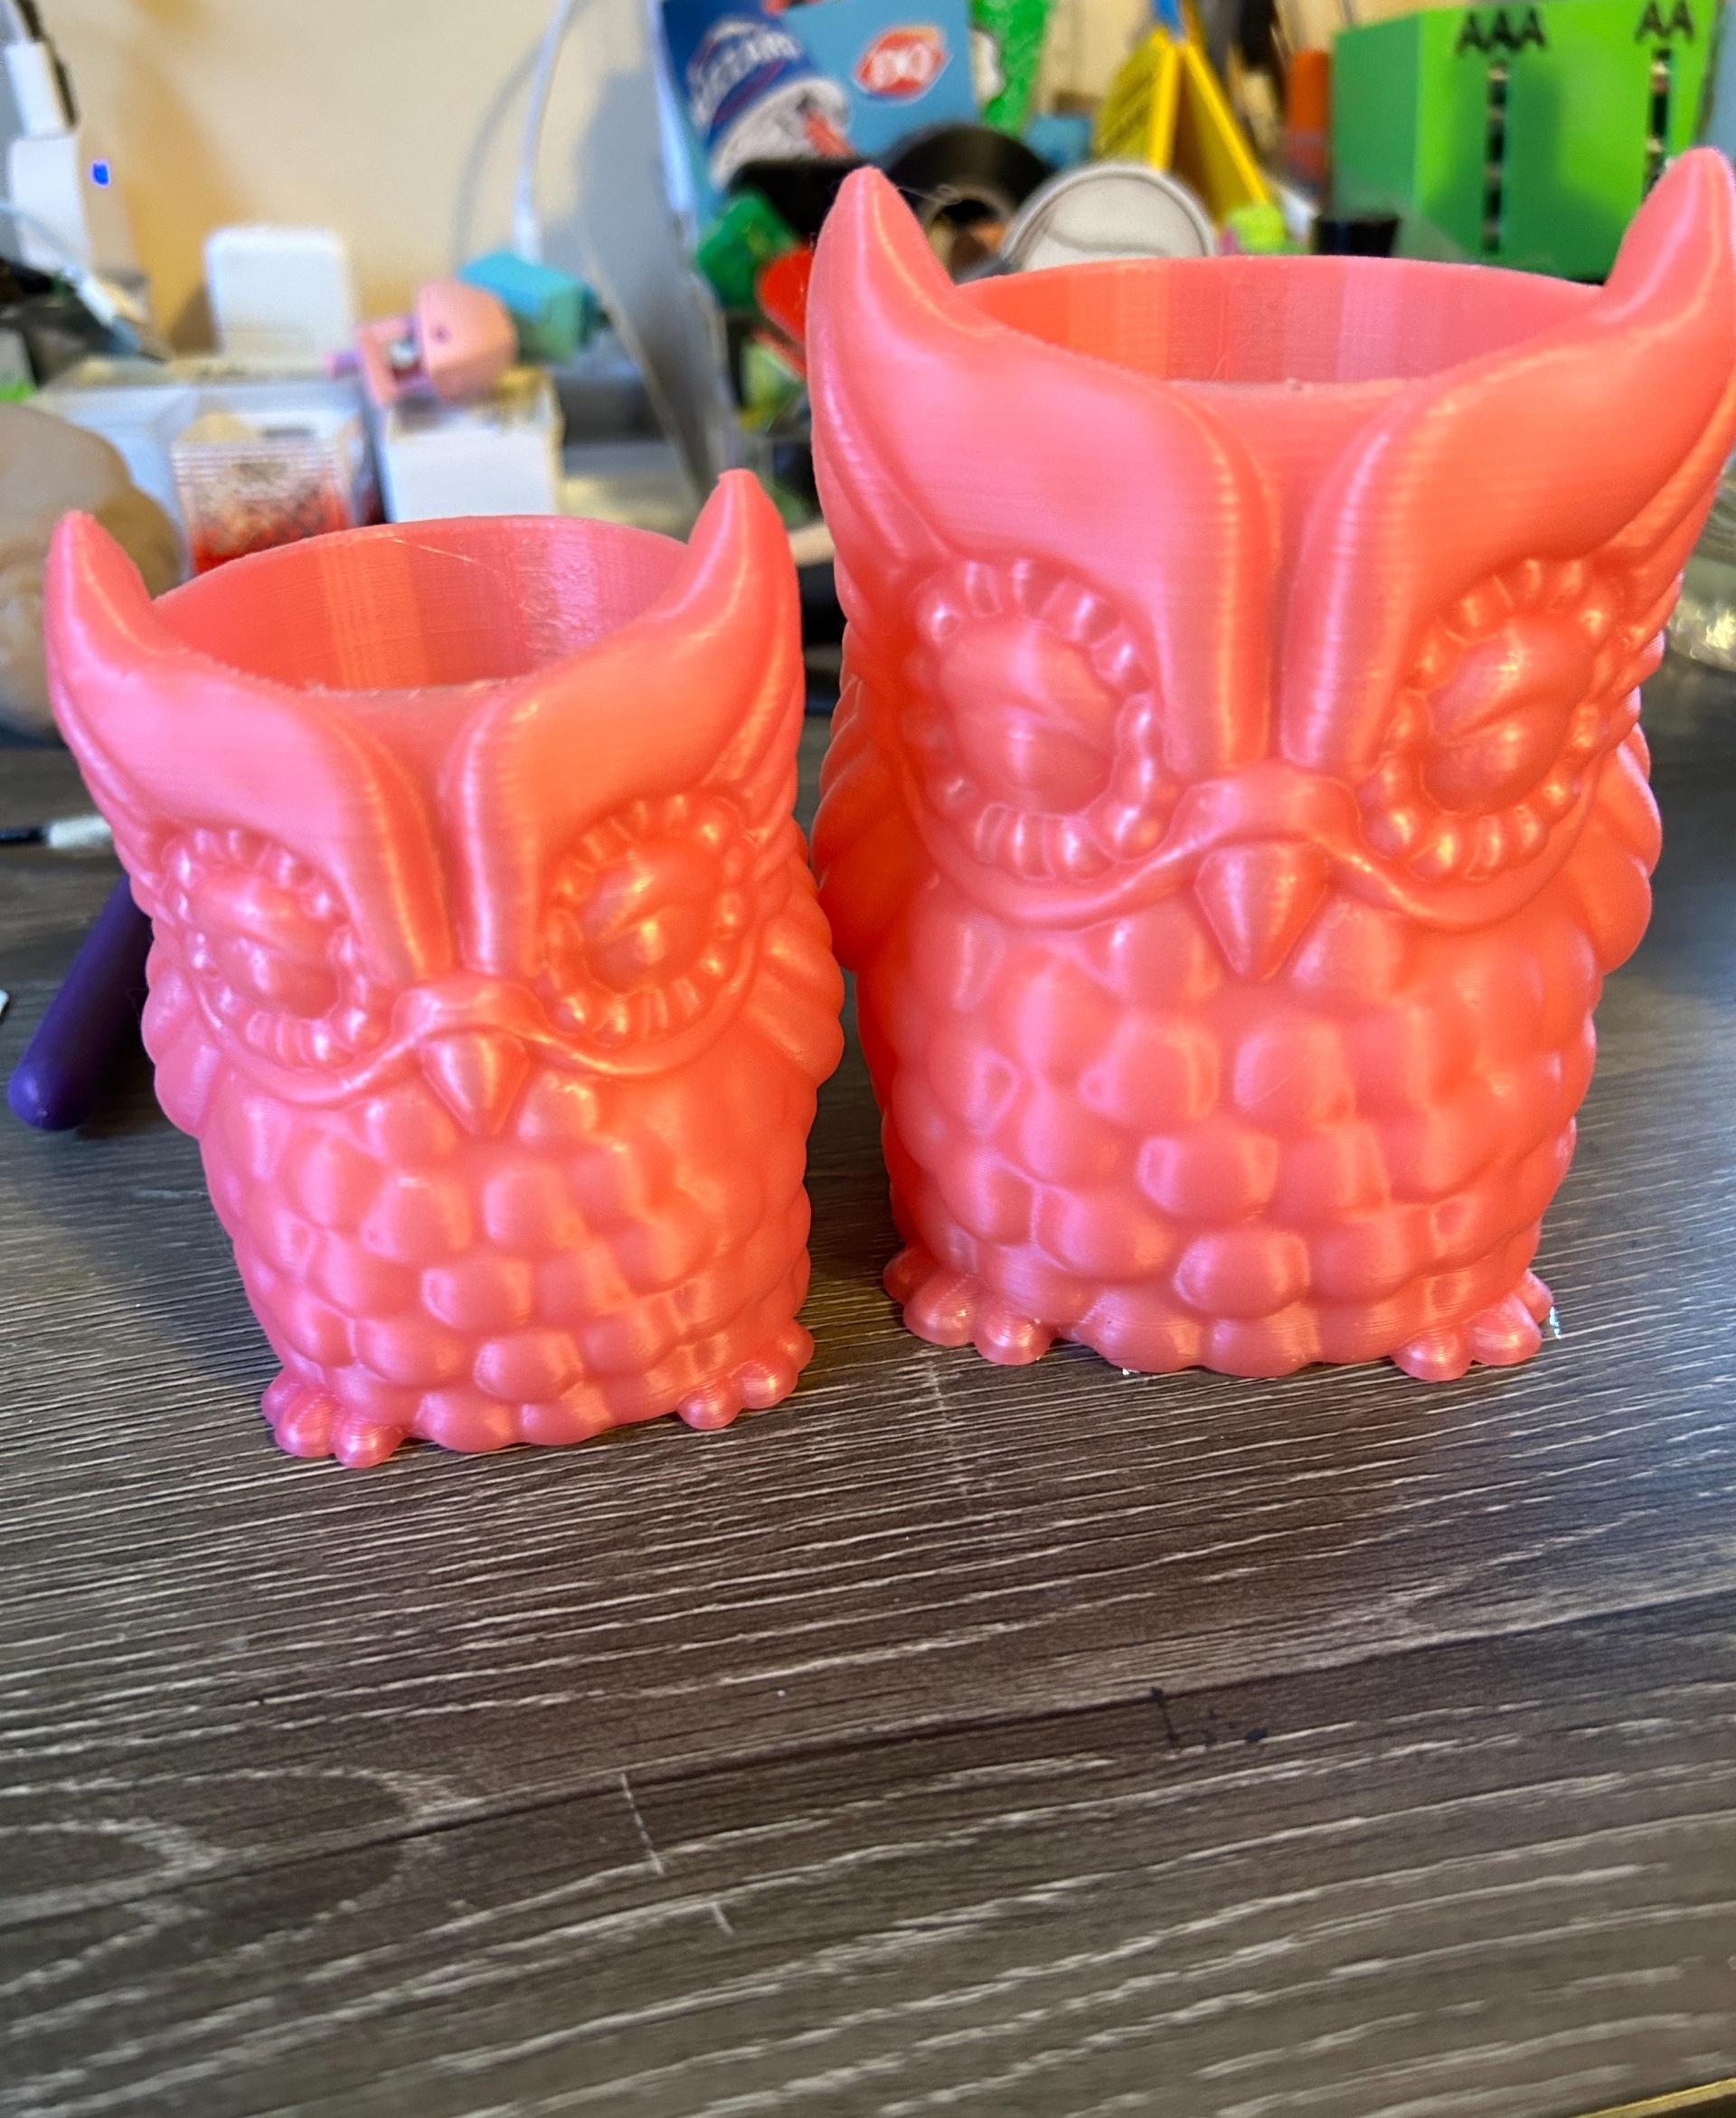 Owl Planter and Owl Pencil pot - Haven't got a chance to throw plants in these yet, but they turned out fantastic! I used Hacthbox Color Change PLA, so when they get warmer, they turn into a lighter orange-ish. Great models! - 3d model